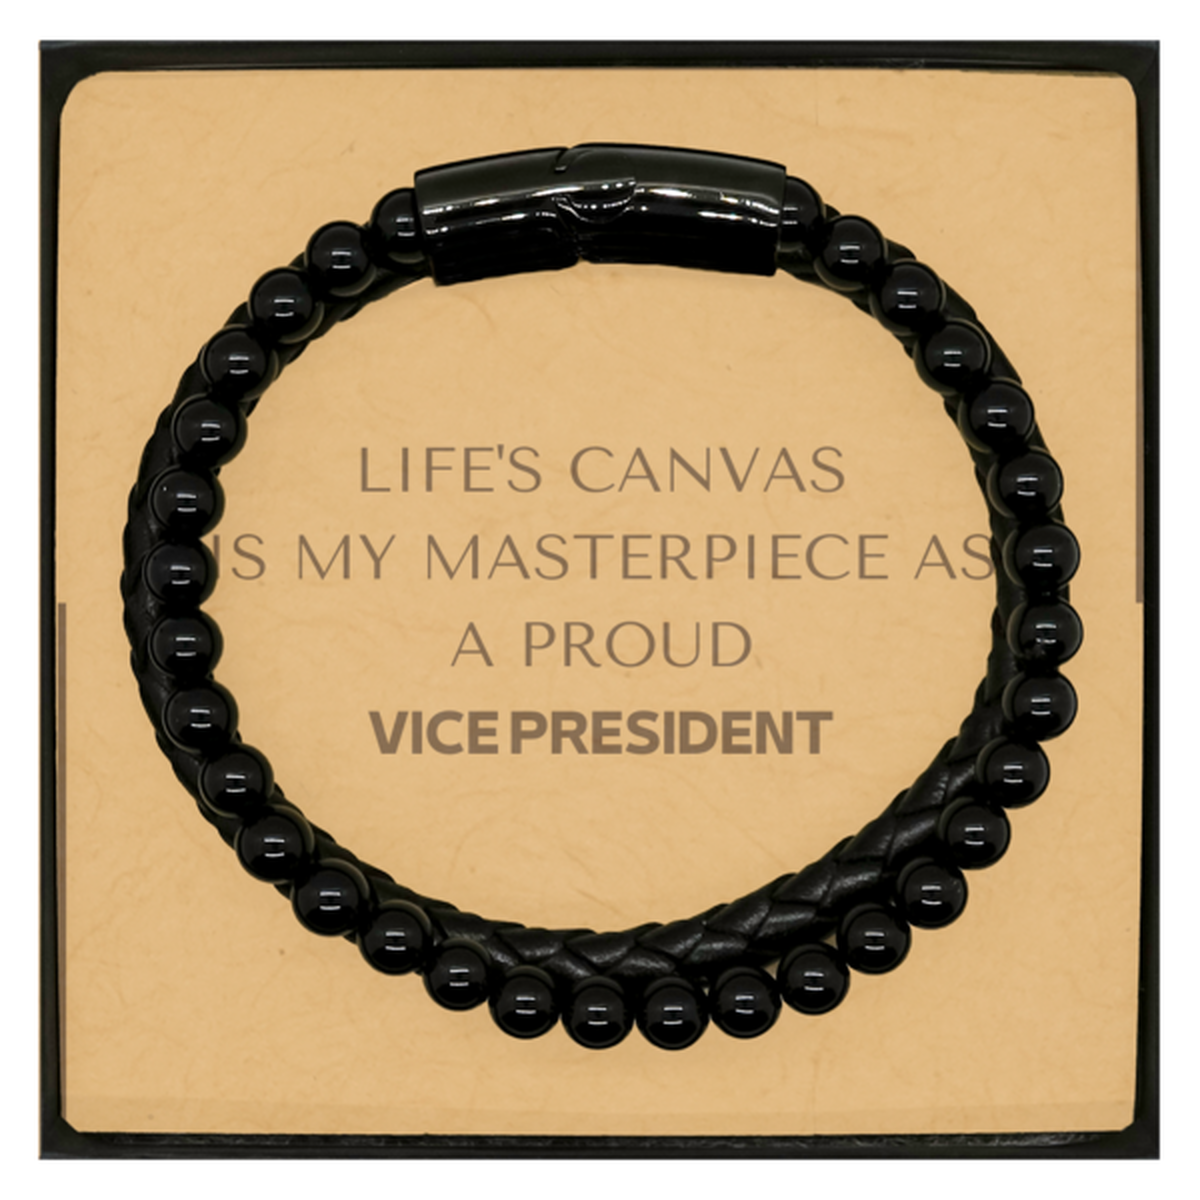 Proud Vice President Gifts, Life's canvas is my masterpiece, Epic Birthday Christmas Unique Stone Leather Bracelets For Vice President, Coworkers, Men, Women, Friends